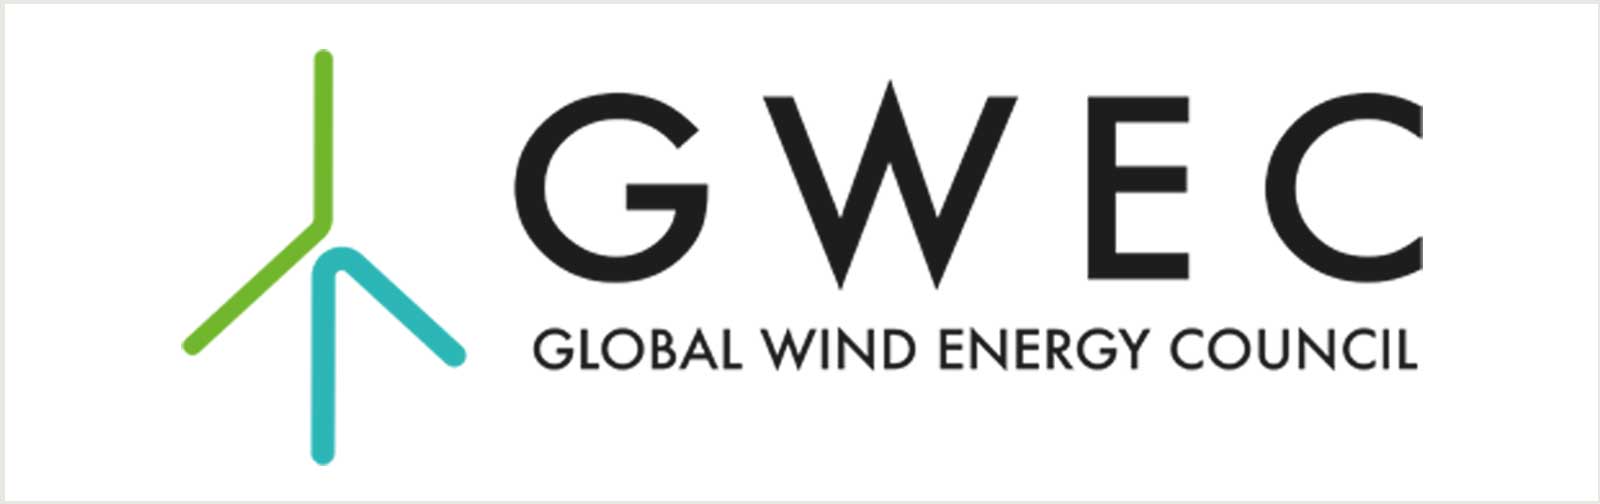 GWEC – Global Wind Energy Council